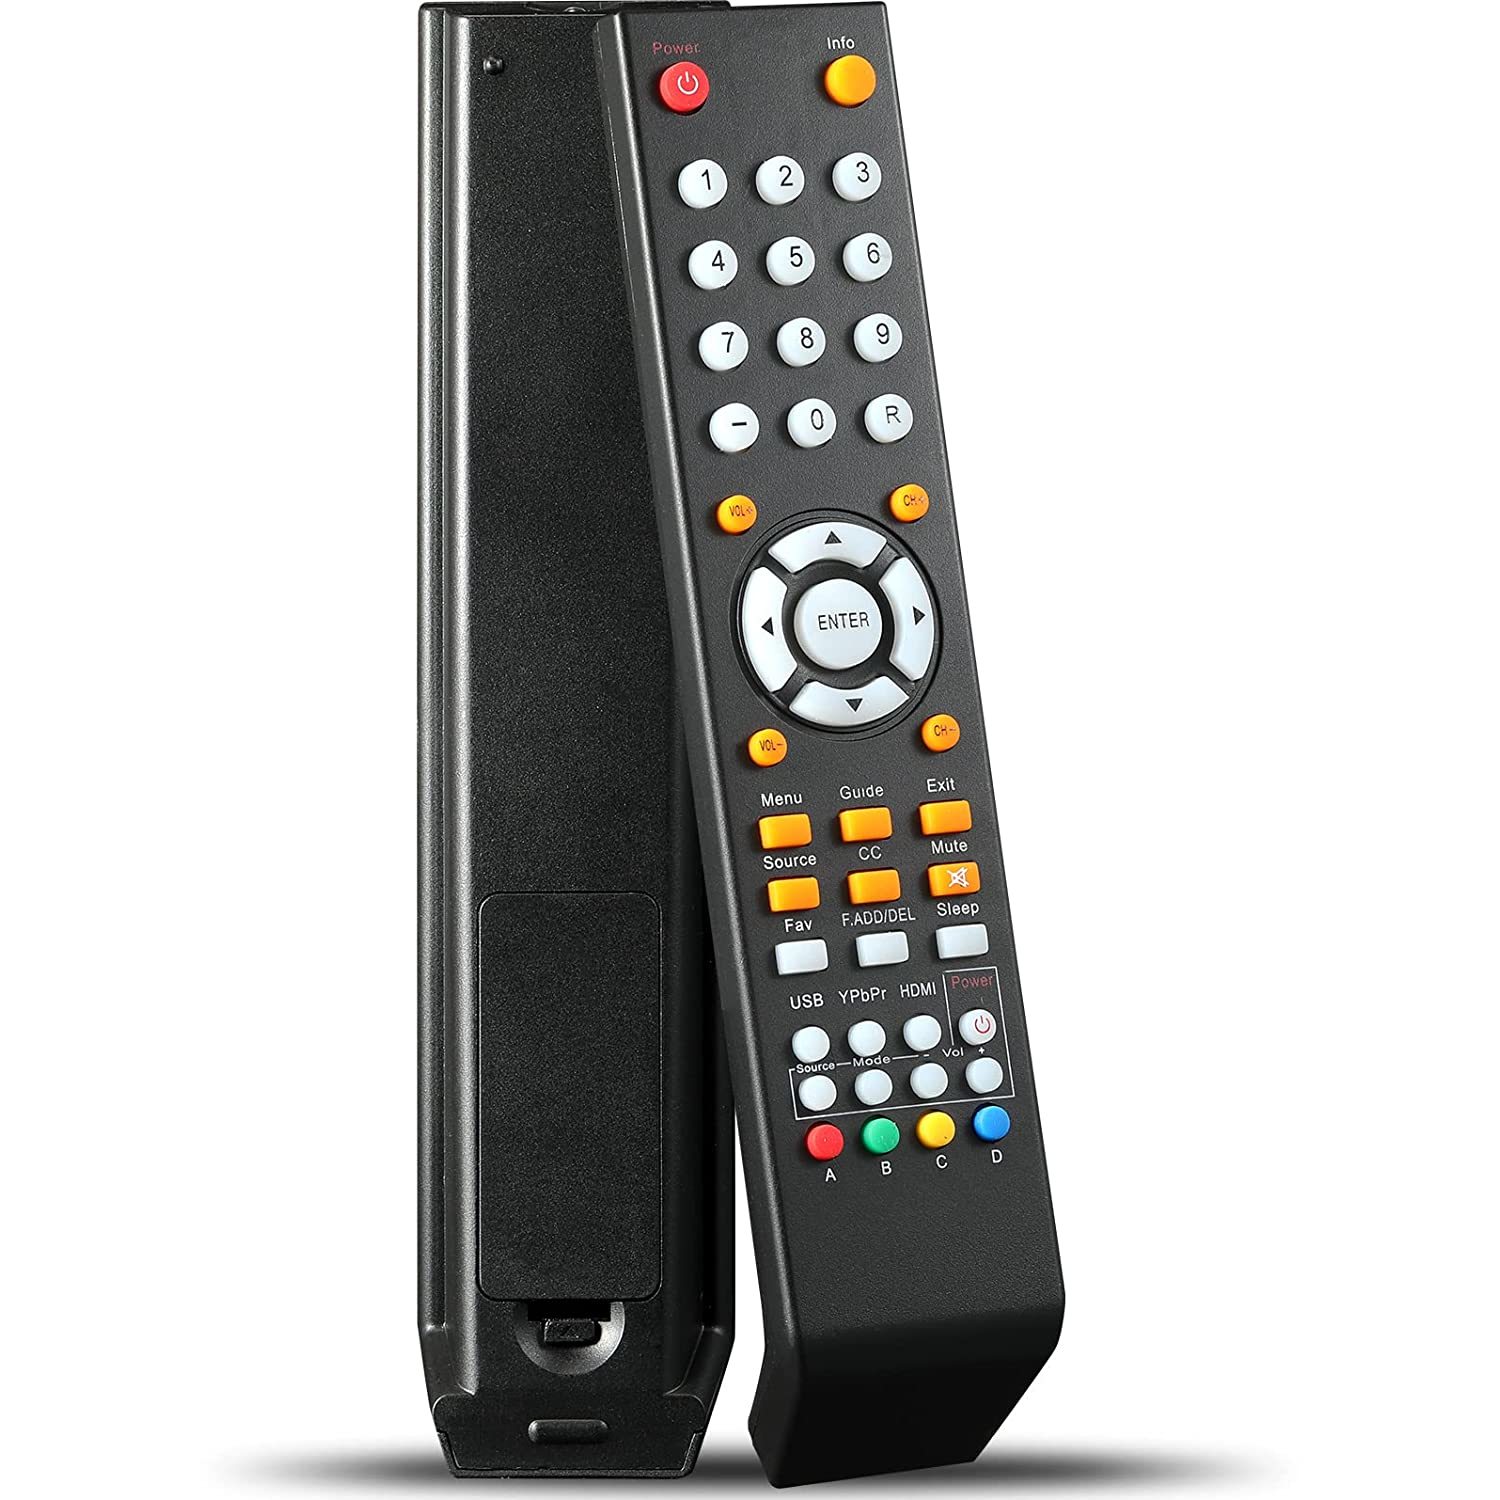 New Universal Replacement Remote Control For Sceptre Tv Led Hdtv - $33.99